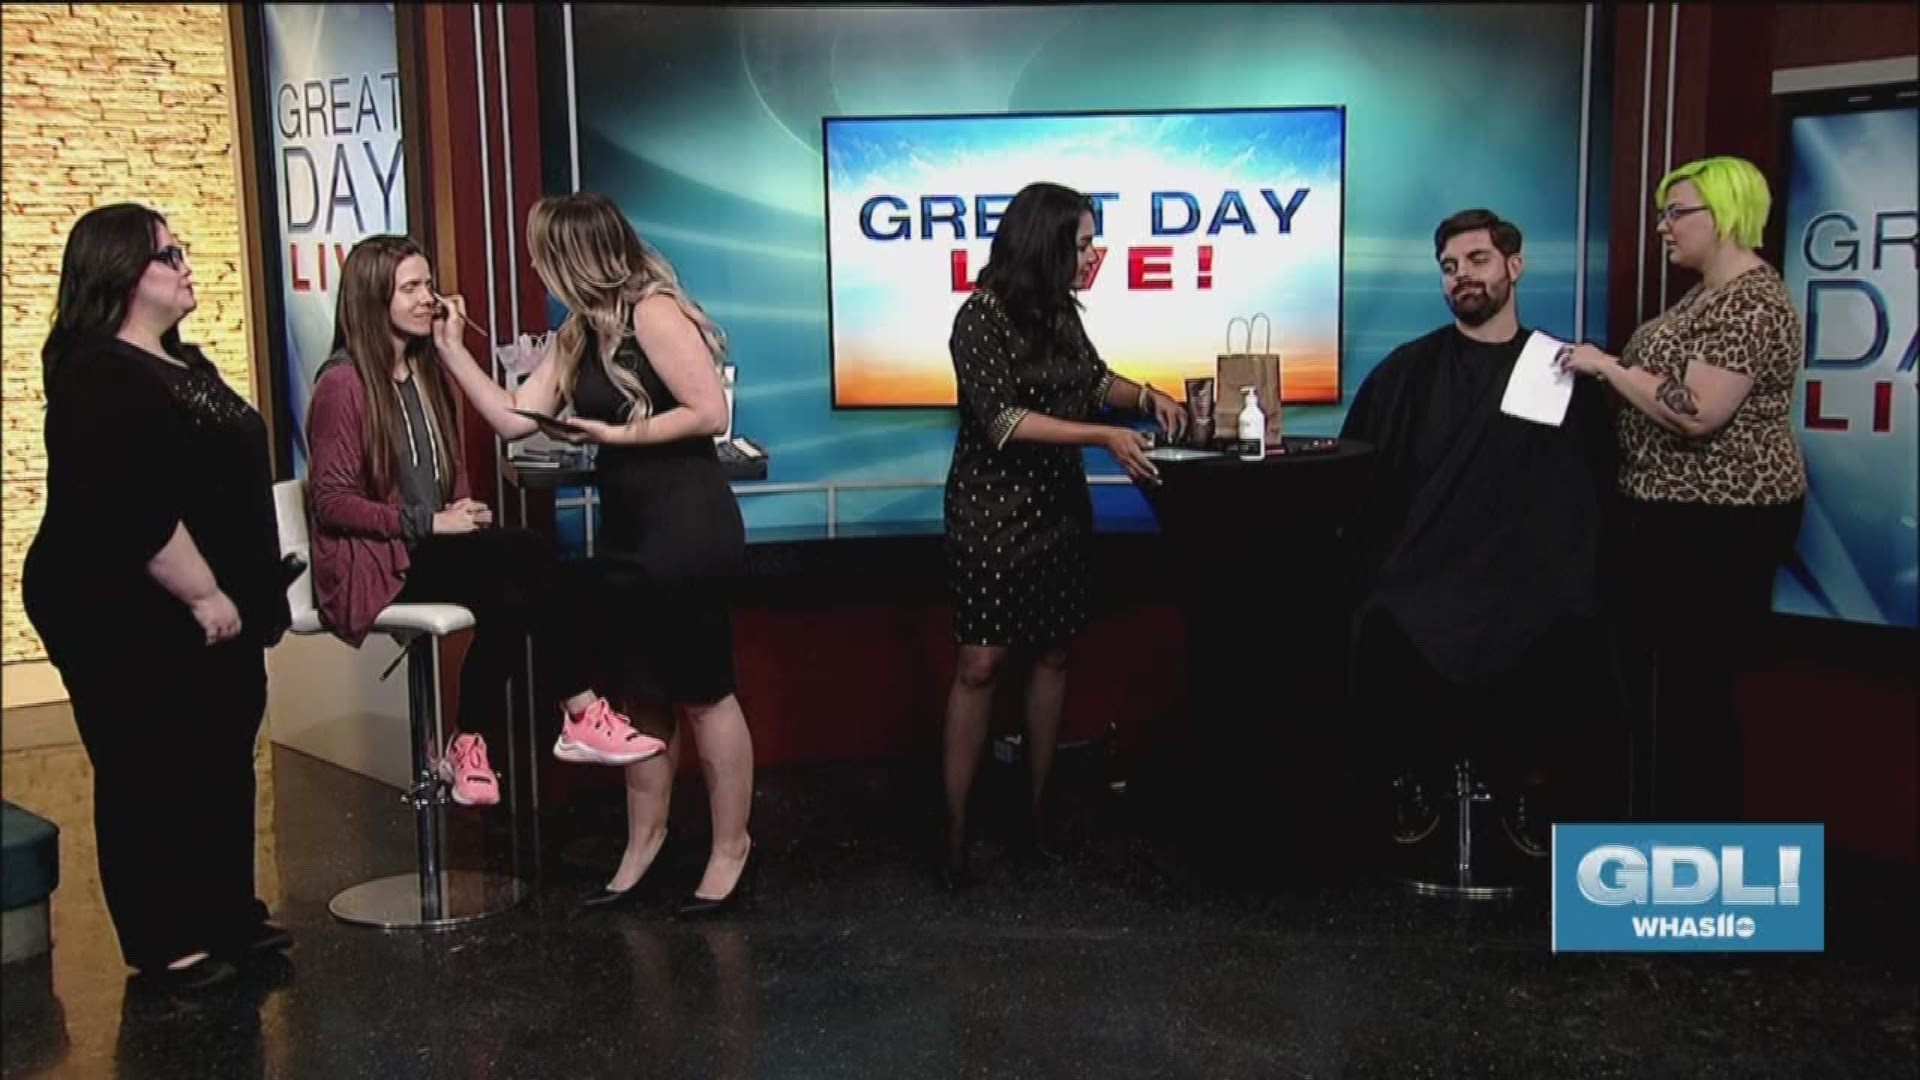 Great Day Live invited some amazing stylists from Fritz's Salon and J. Nicolle Salon & Spa on the show in celebration of National Beautician Day.